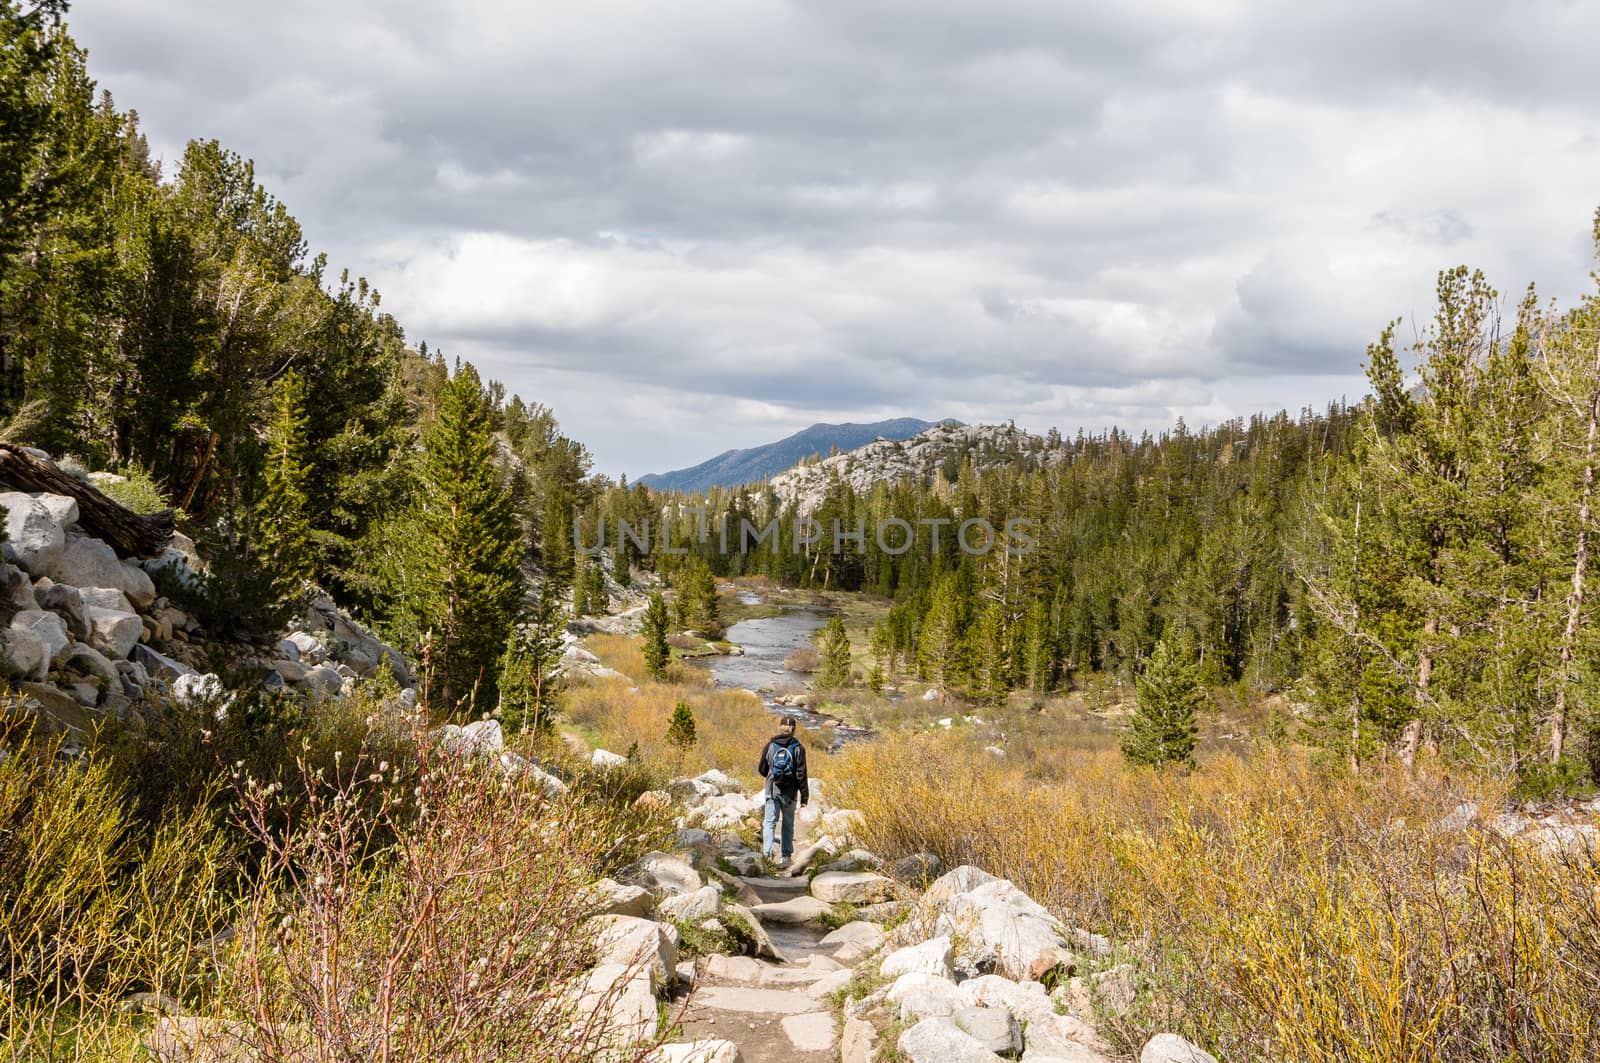 Hiker in Little Lakes Valley, California by Njean